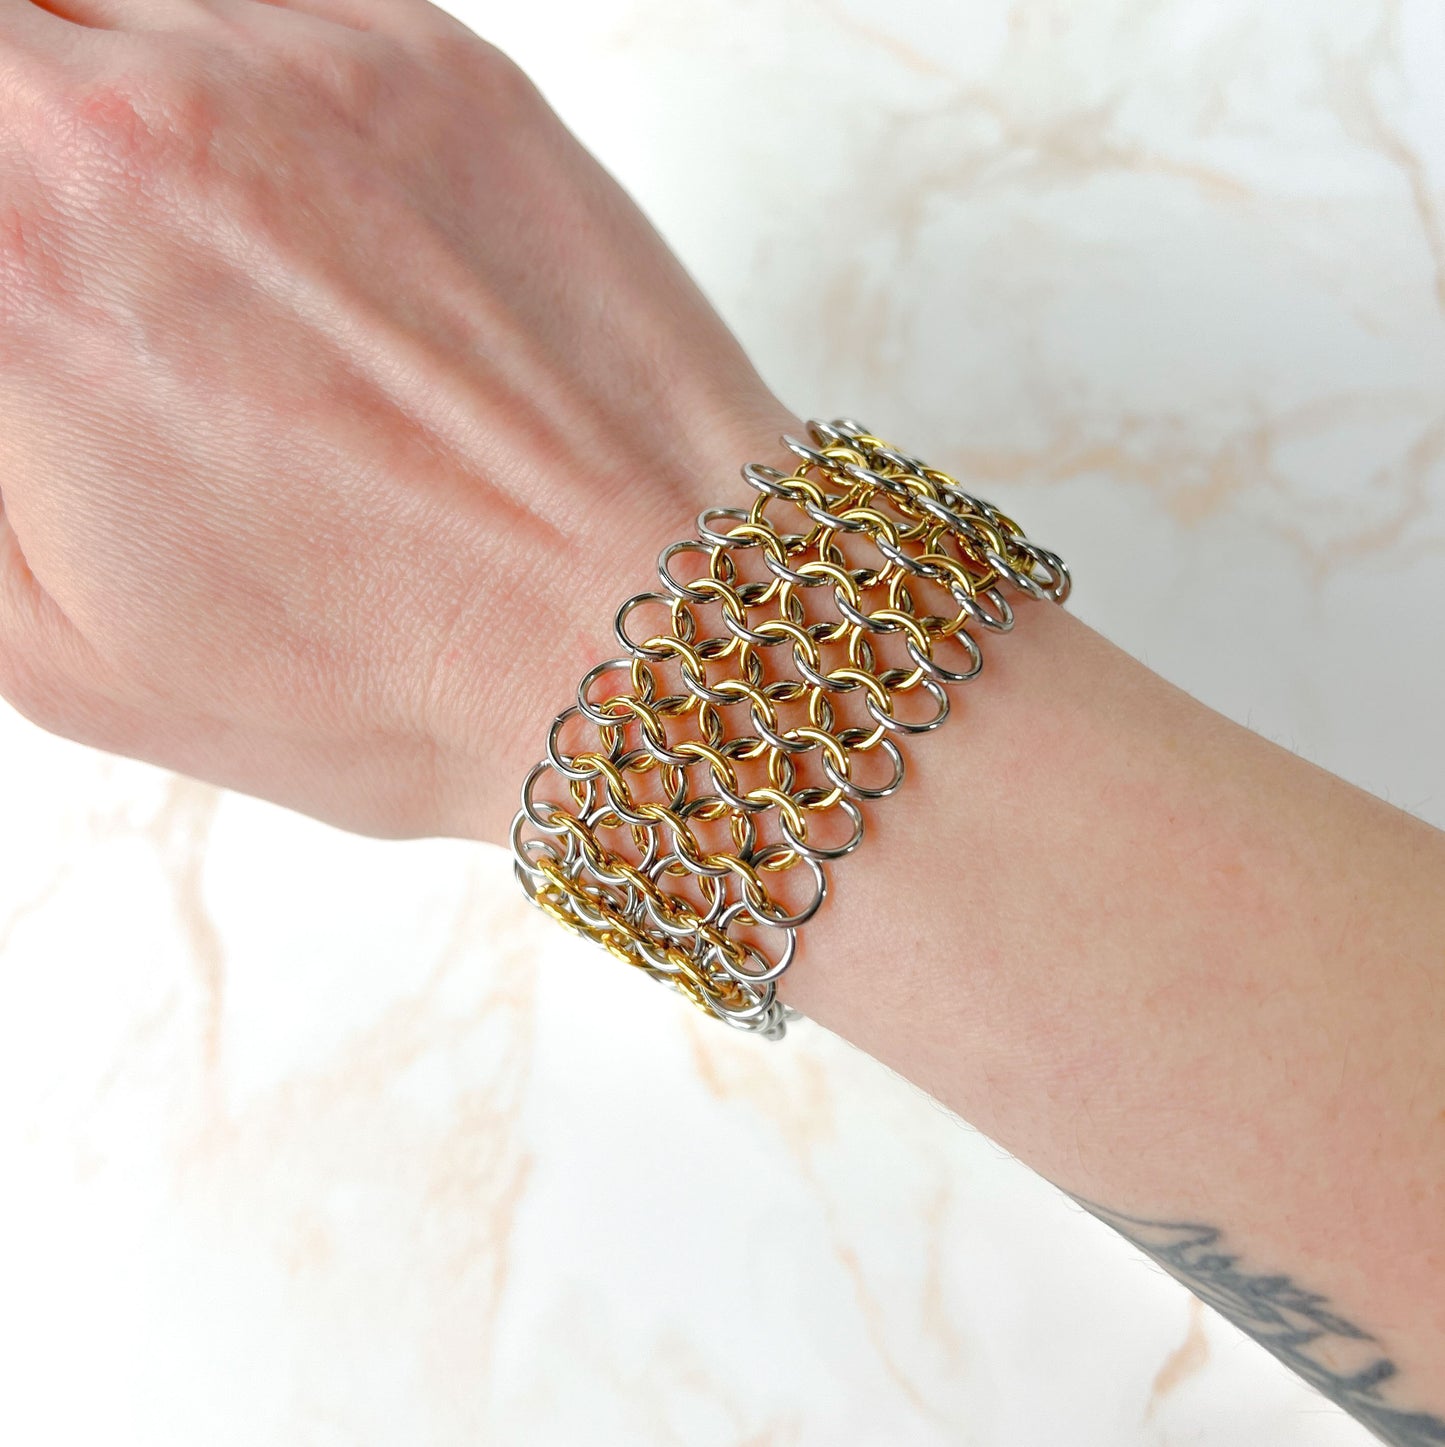 Chainmail bracelet European 4 in 1 stainless steel and 18k gold plated cuff